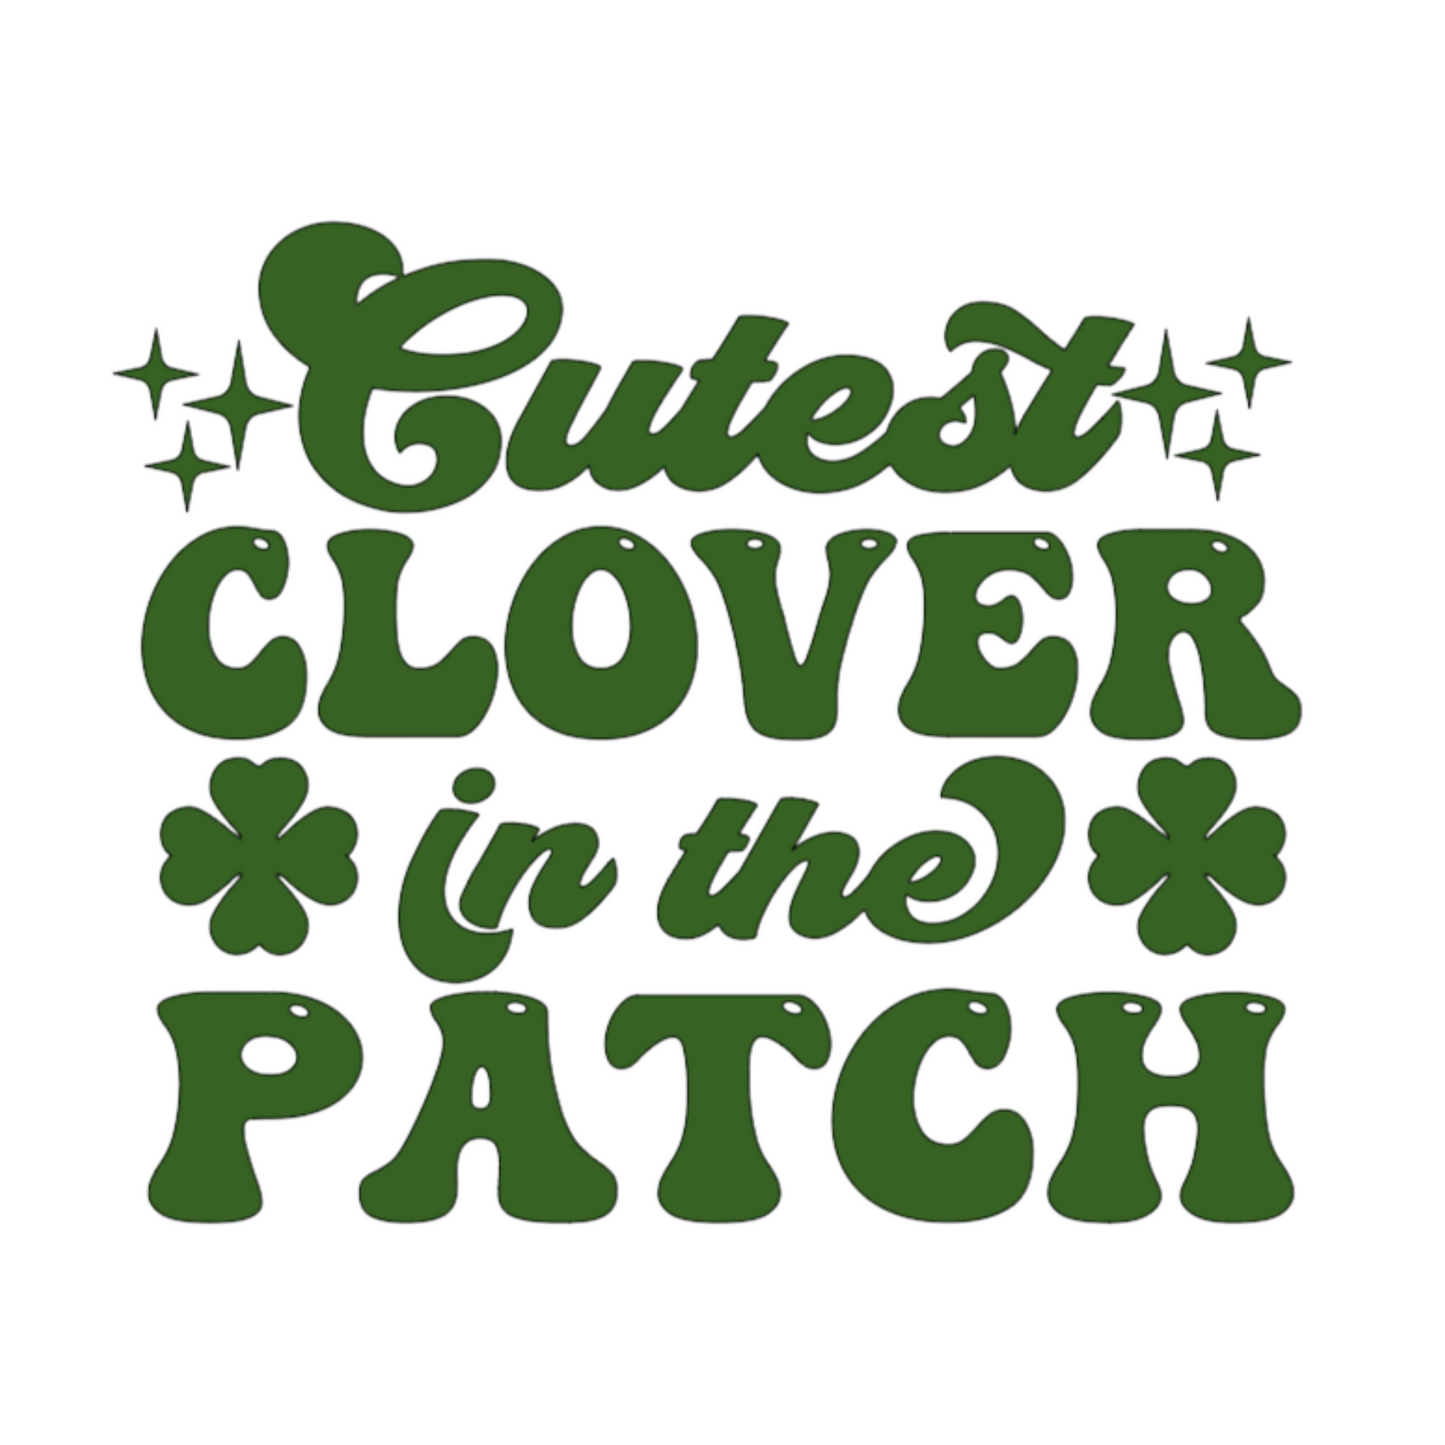 Cutest Clover In The Patch T-Shirt for youth and toddler in white. Adorable saying in green with twinkles and 4 leaf clovers. This is an image of the design on a blank white background for an unclose view of the design.